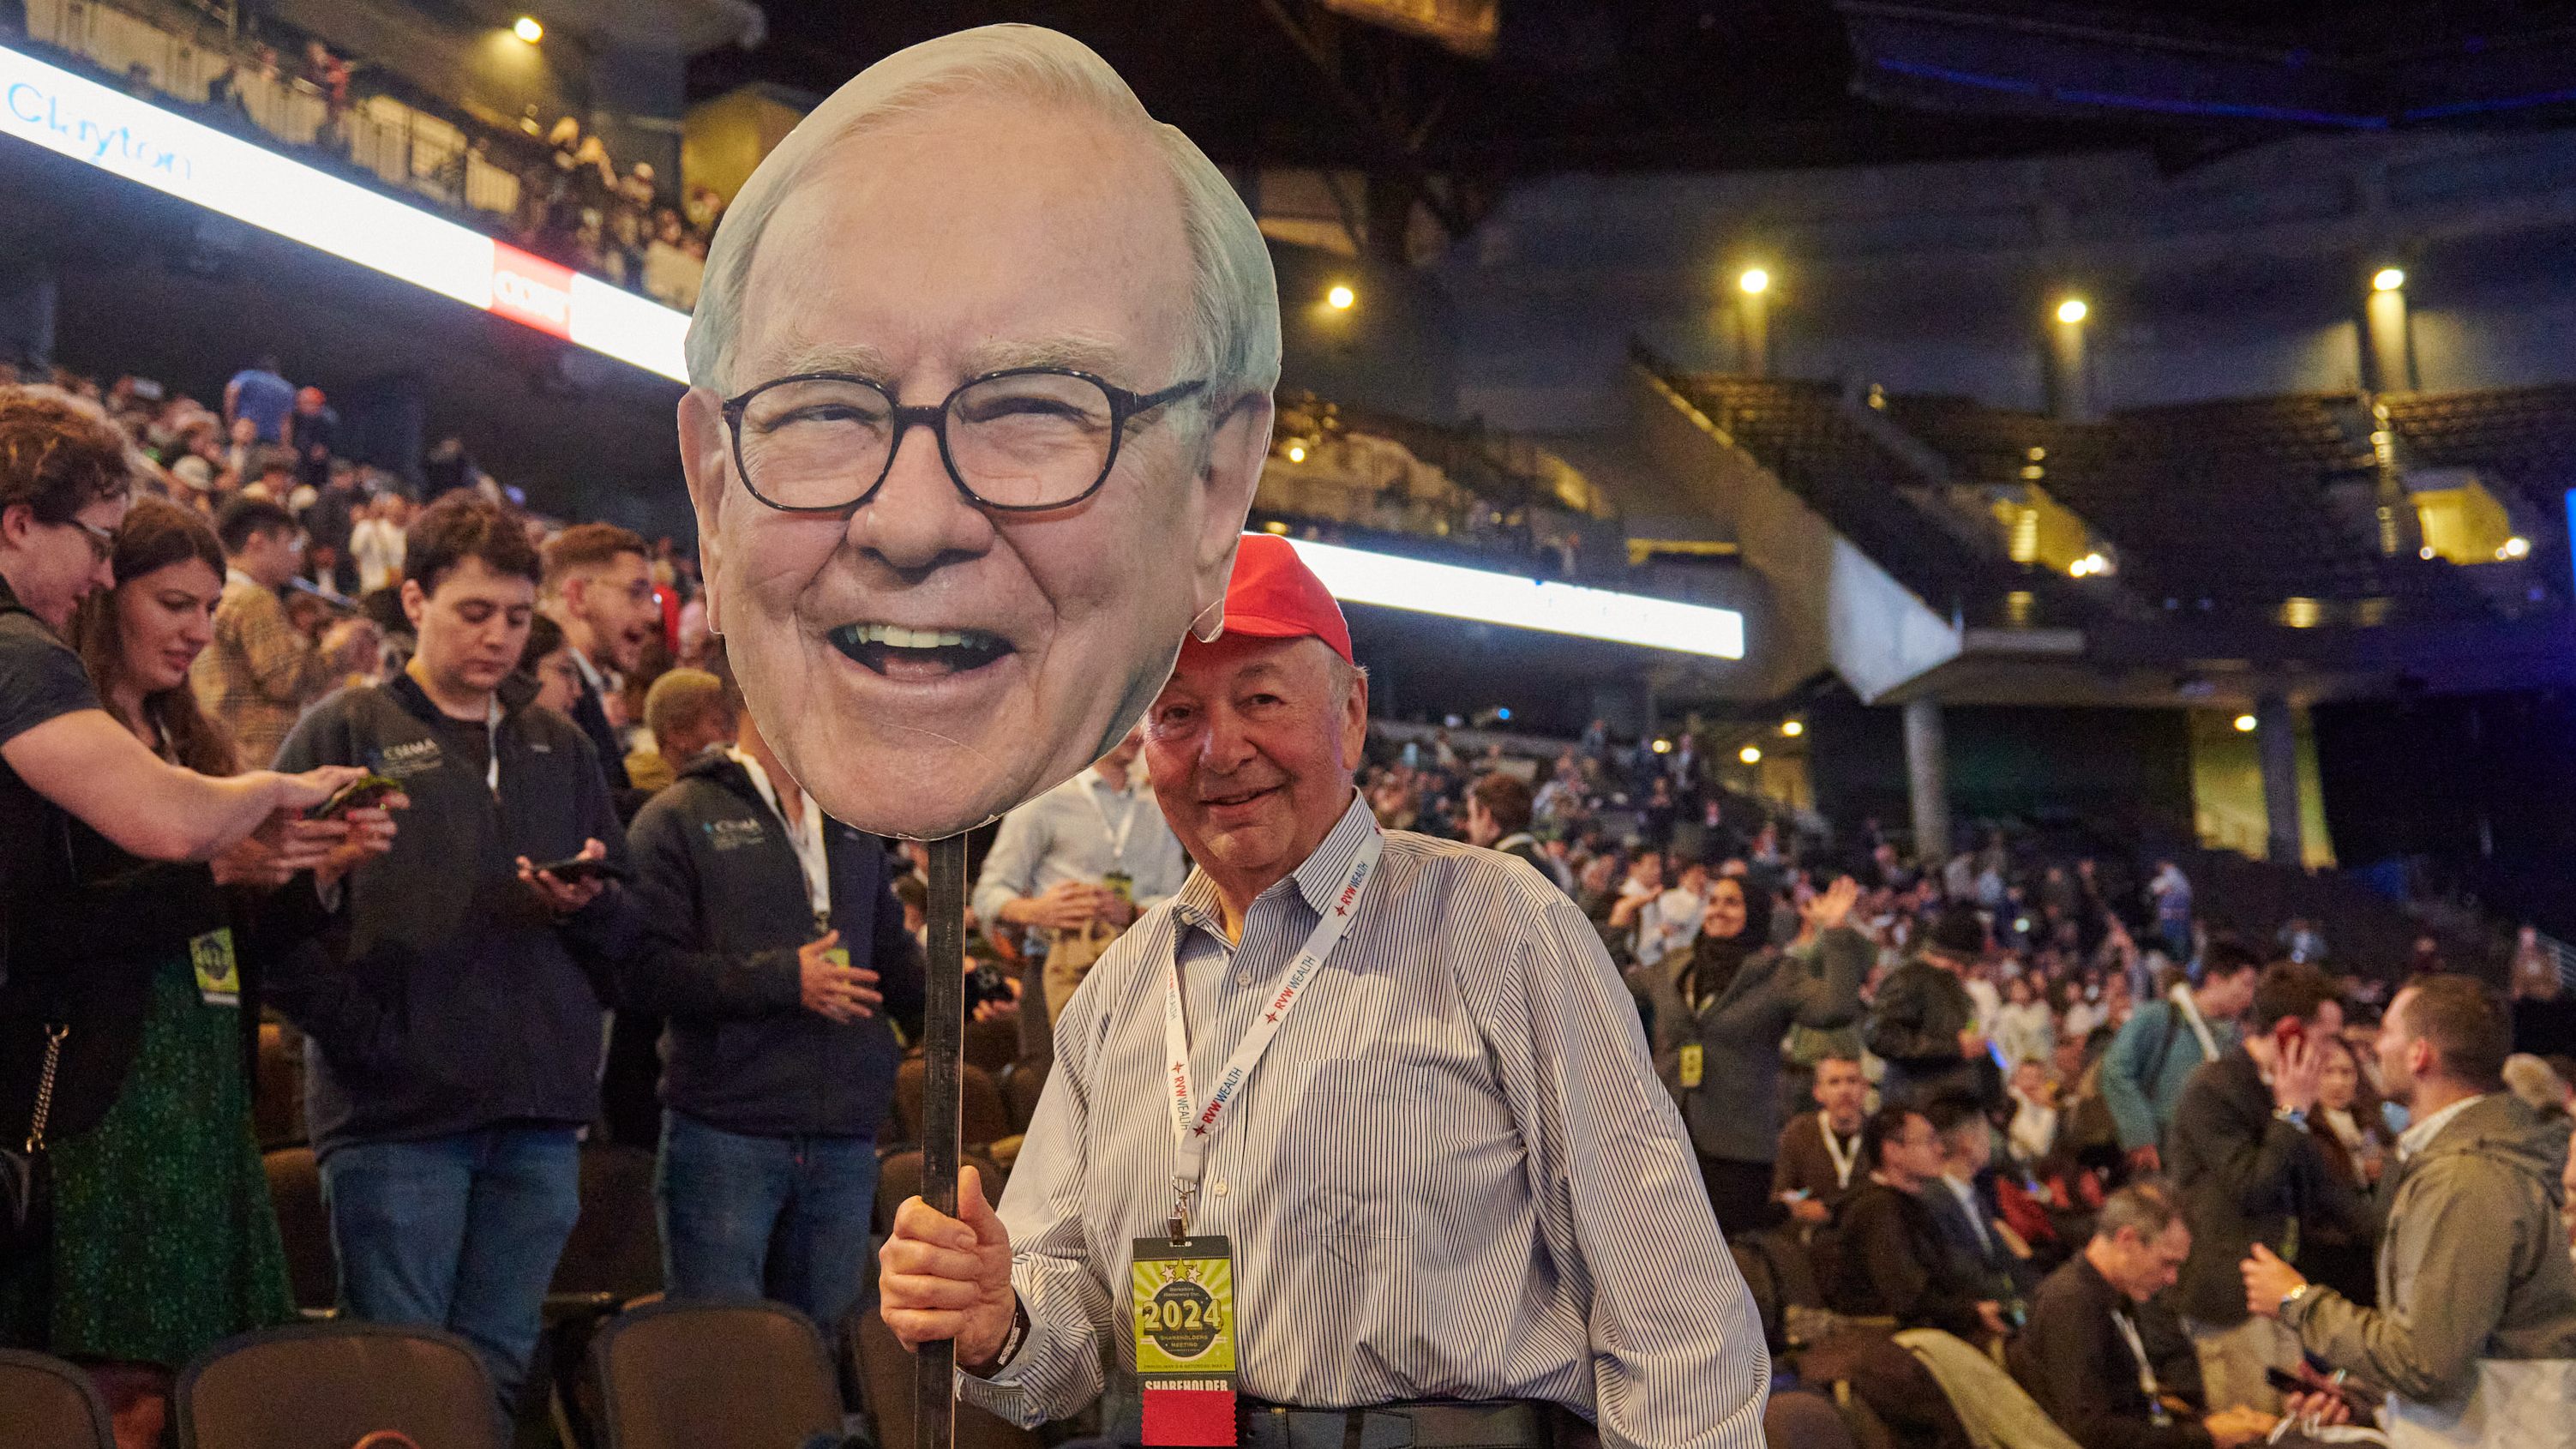 About 10,000 shareholders, many of them huge fans of Warren Buffett, headed to the Berkshire Hathaway annual meeting in Omaha, Nebraska, to listen to him